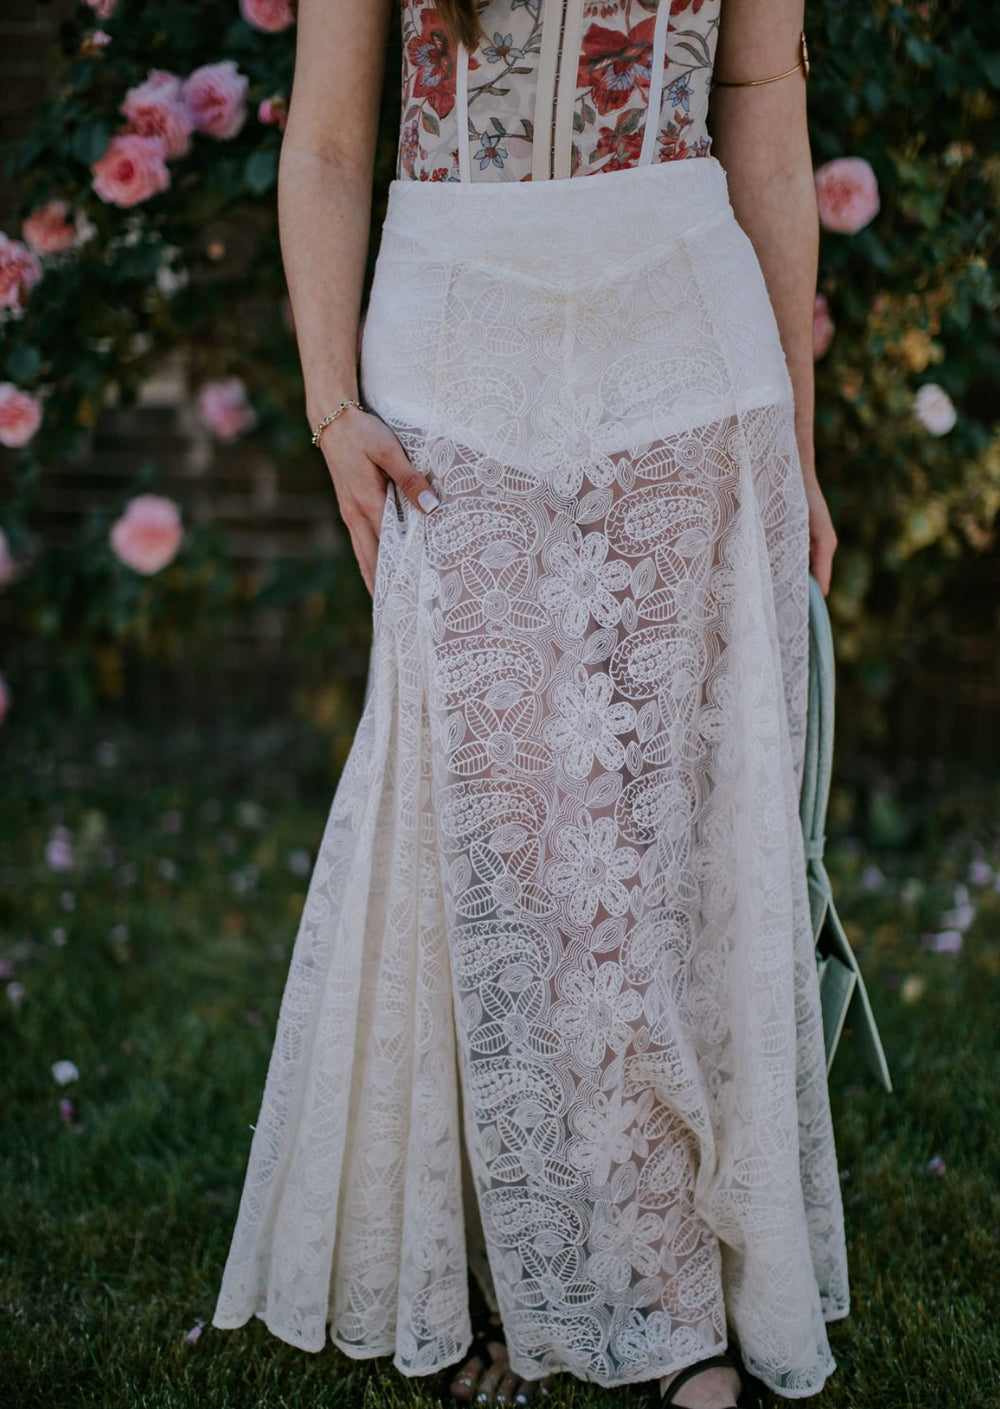 Free People SkirtBeat of The Moment Maxi Skirt | Free People